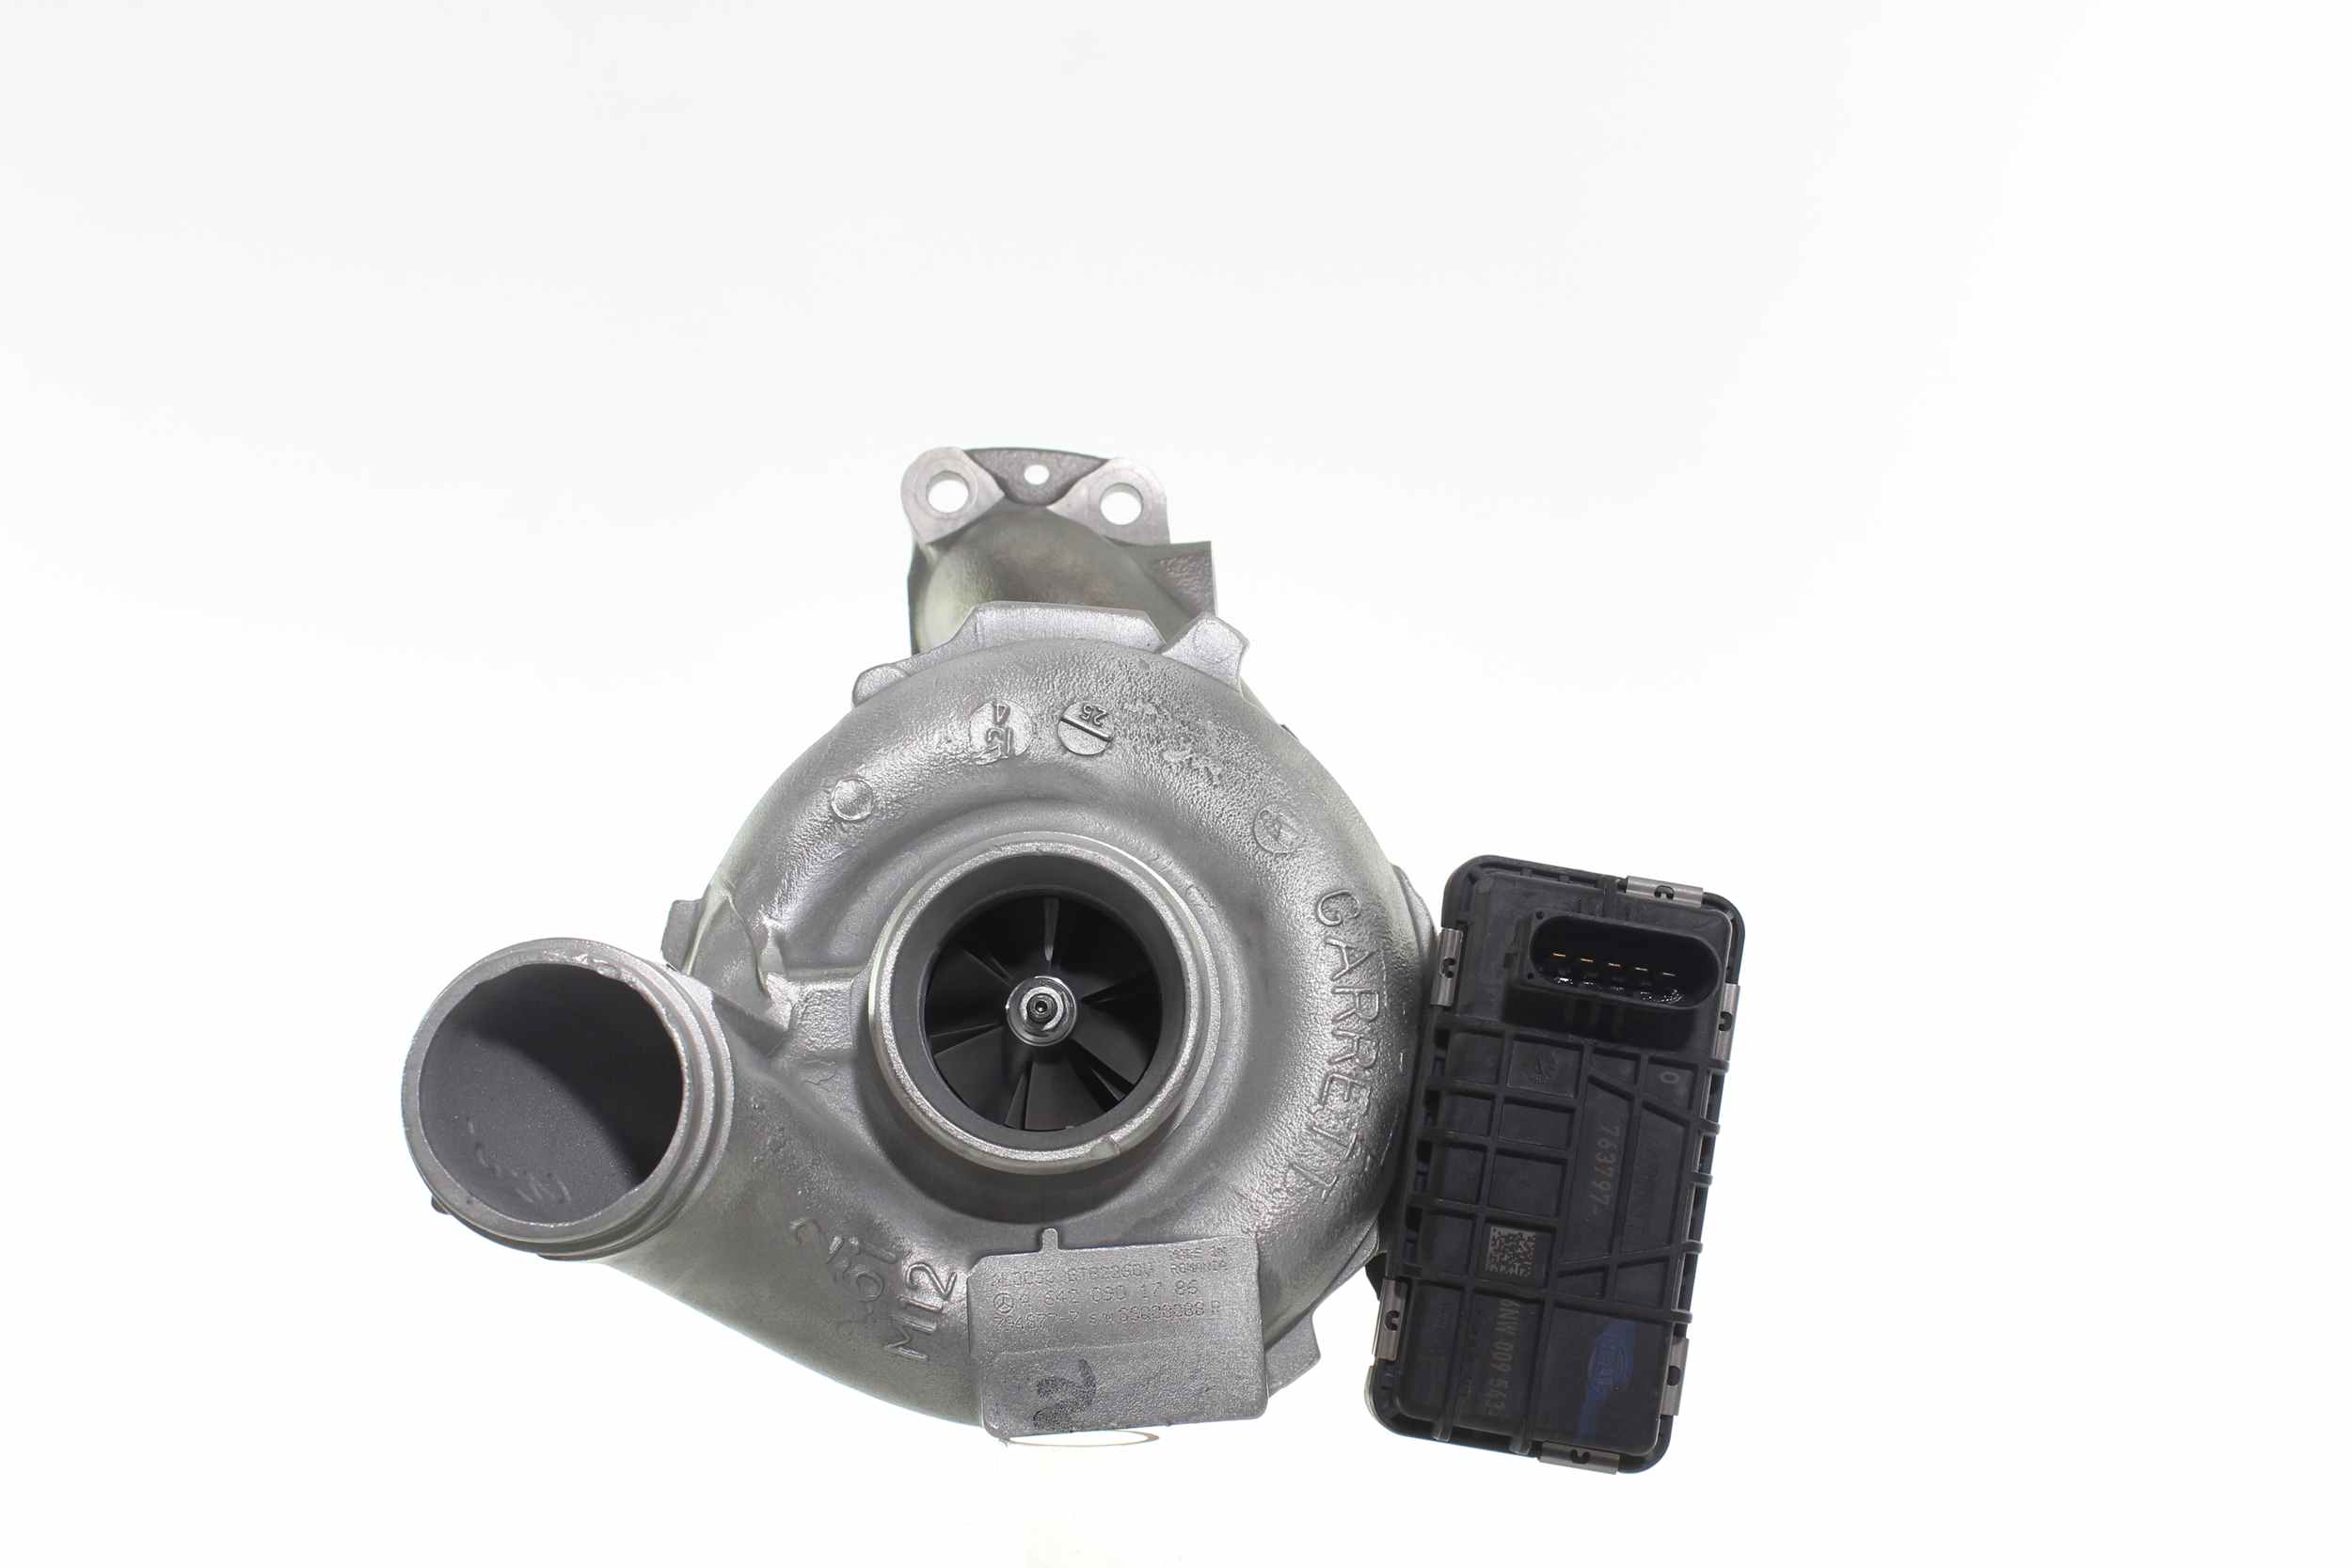 ALANKO 11901299 Turbocharger Exhaust Turbocharger, Water-cooled